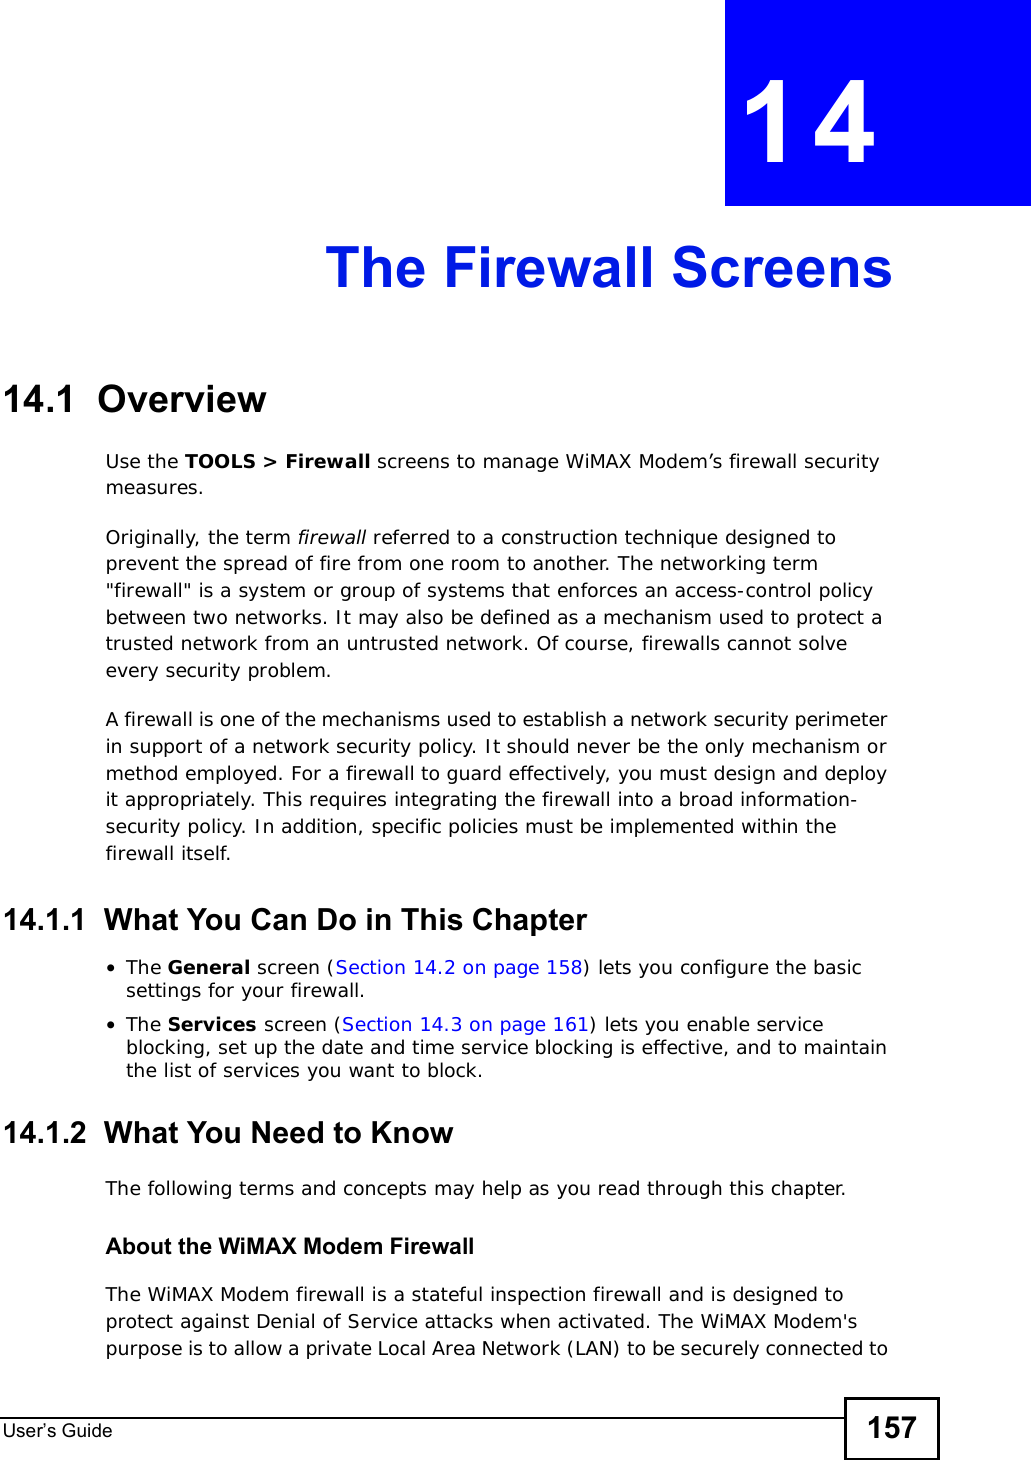 User s Guide 157CHAPTER 14The Firewall Screens14.1  OverviewUse the TOOLS &gt; Firewall screens to manage WiMAX Modem’s firewall security measures.Originally, the term firewall referred to a construction technique designed to prevent the spread of fire from one room to another. The networking term &quot;firewall&quot; is a system or group of systems that enforces an access-control policy between two networks. It may also be defined as a mechanism used to protect a trusted network from an untrusted network. Of course, firewalls cannot solve every security problem.A firewall is one of the mechanisms used to establish a network security perimeter in support of a network security policy. It should never be the only mechanism or method employed. For a firewall to guard effectively, you must design and deploy it appropriately. This requires integrating the firewall into a broad information-security policy. In addition, specific policies must be implemented within the firewall itself.14.1.1  What You Can Do in This Chapter•The General screen (Section 14.2 on page 158) lets you configure the basic settings for your firewall.•The Services screen (Section 14.3 on page 161) lets you enable service blocking, set up the date and time service blocking is effective, and to maintain the list of services you want to block.14.1.2  What You Need to KnowThe following terms and concepts may help as you read through this chapter.About the WiMAX Modem FirewallThe WiMAX Modem firewall is a stateful inspection firewall and is designed to protect against Denial of Service attacks when activated. The WiMAX Modem&apos;s purpose is to allow a private Local Area Network (LAN) to be securely connected to 